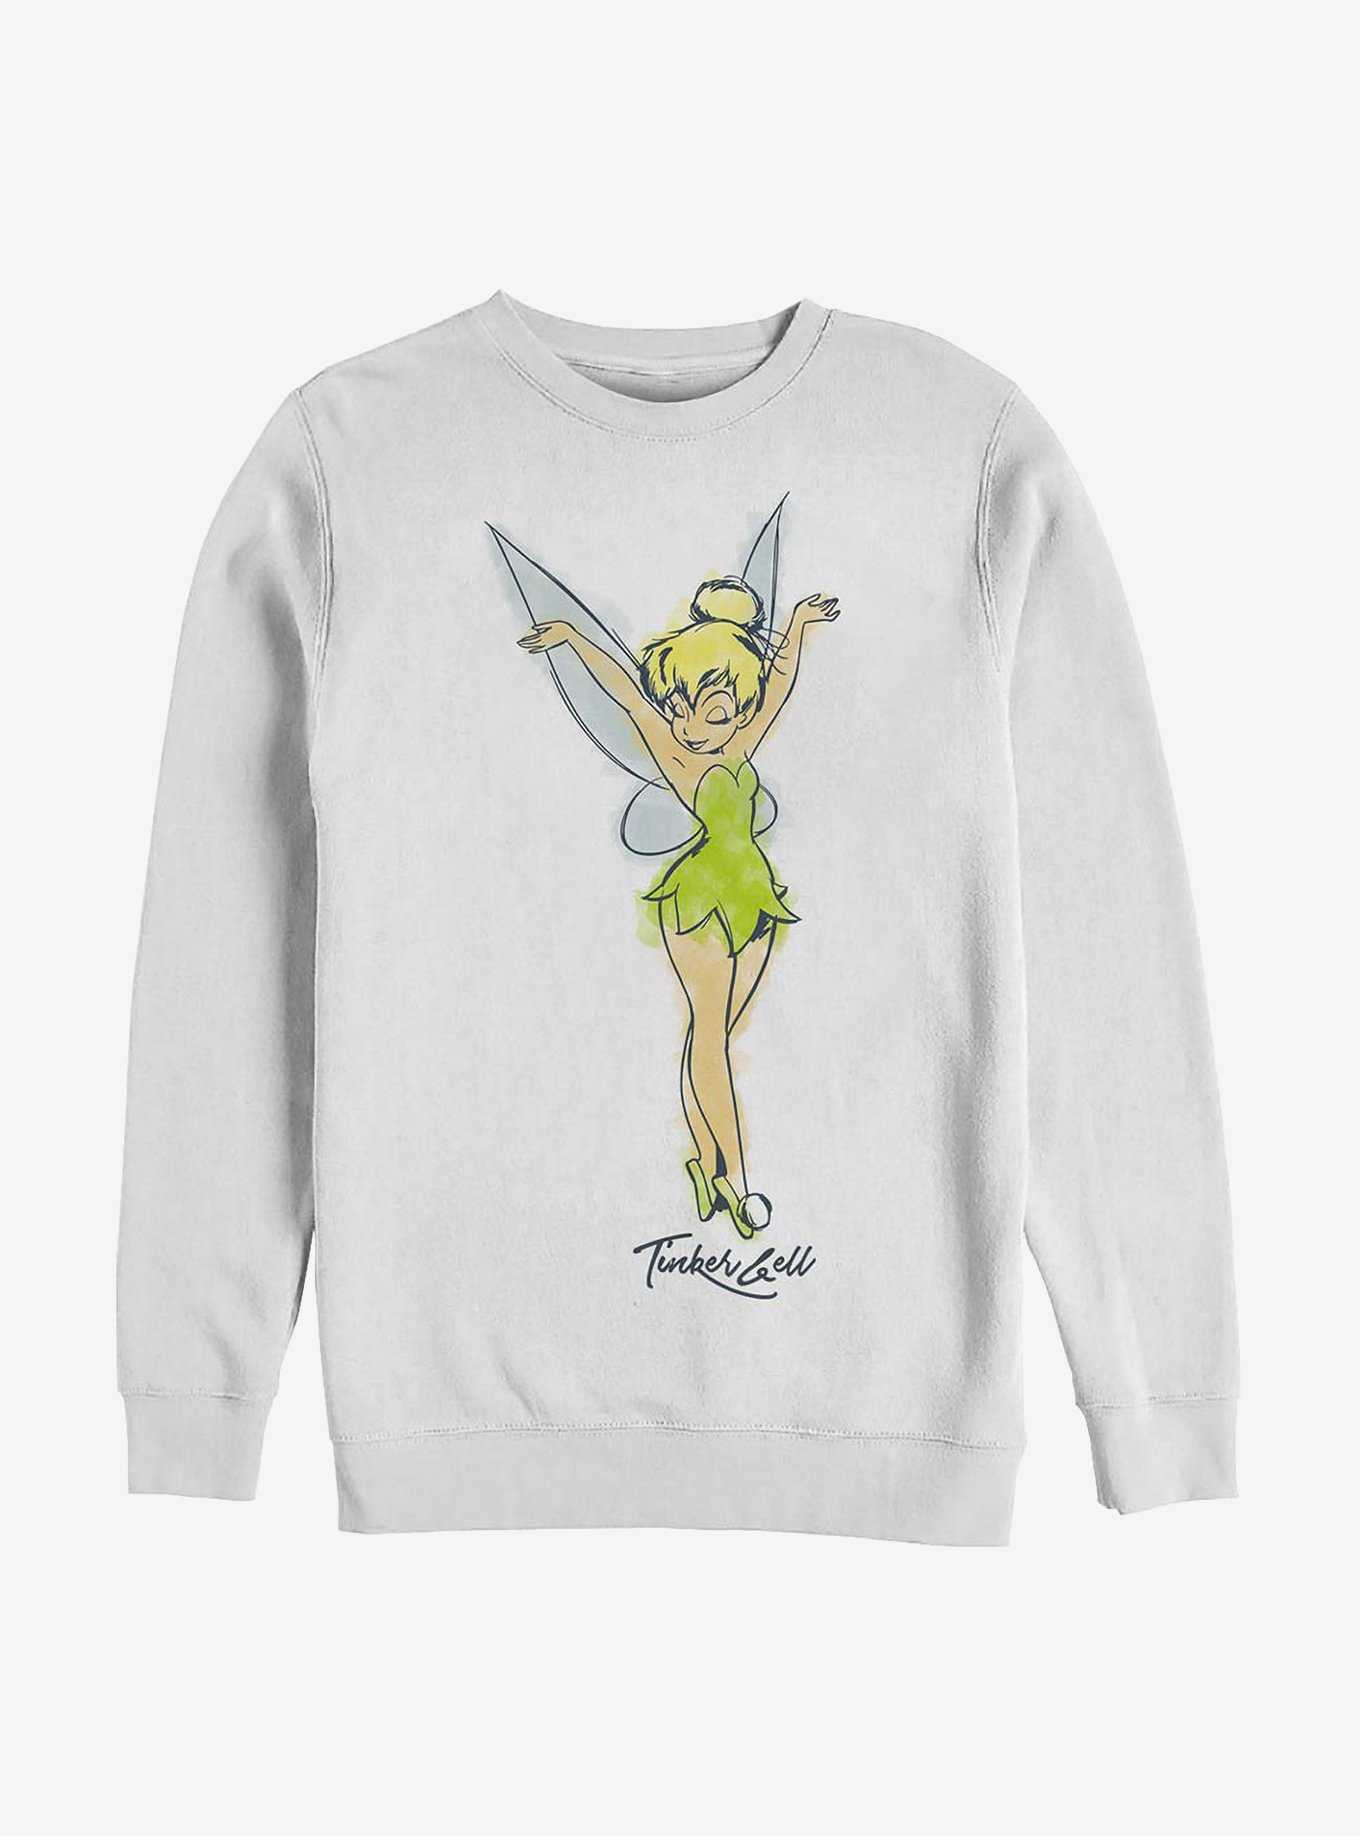 OFFICIAL Peter Pan Merchandise, Shirts & More | Hot Topic | T-Shirts